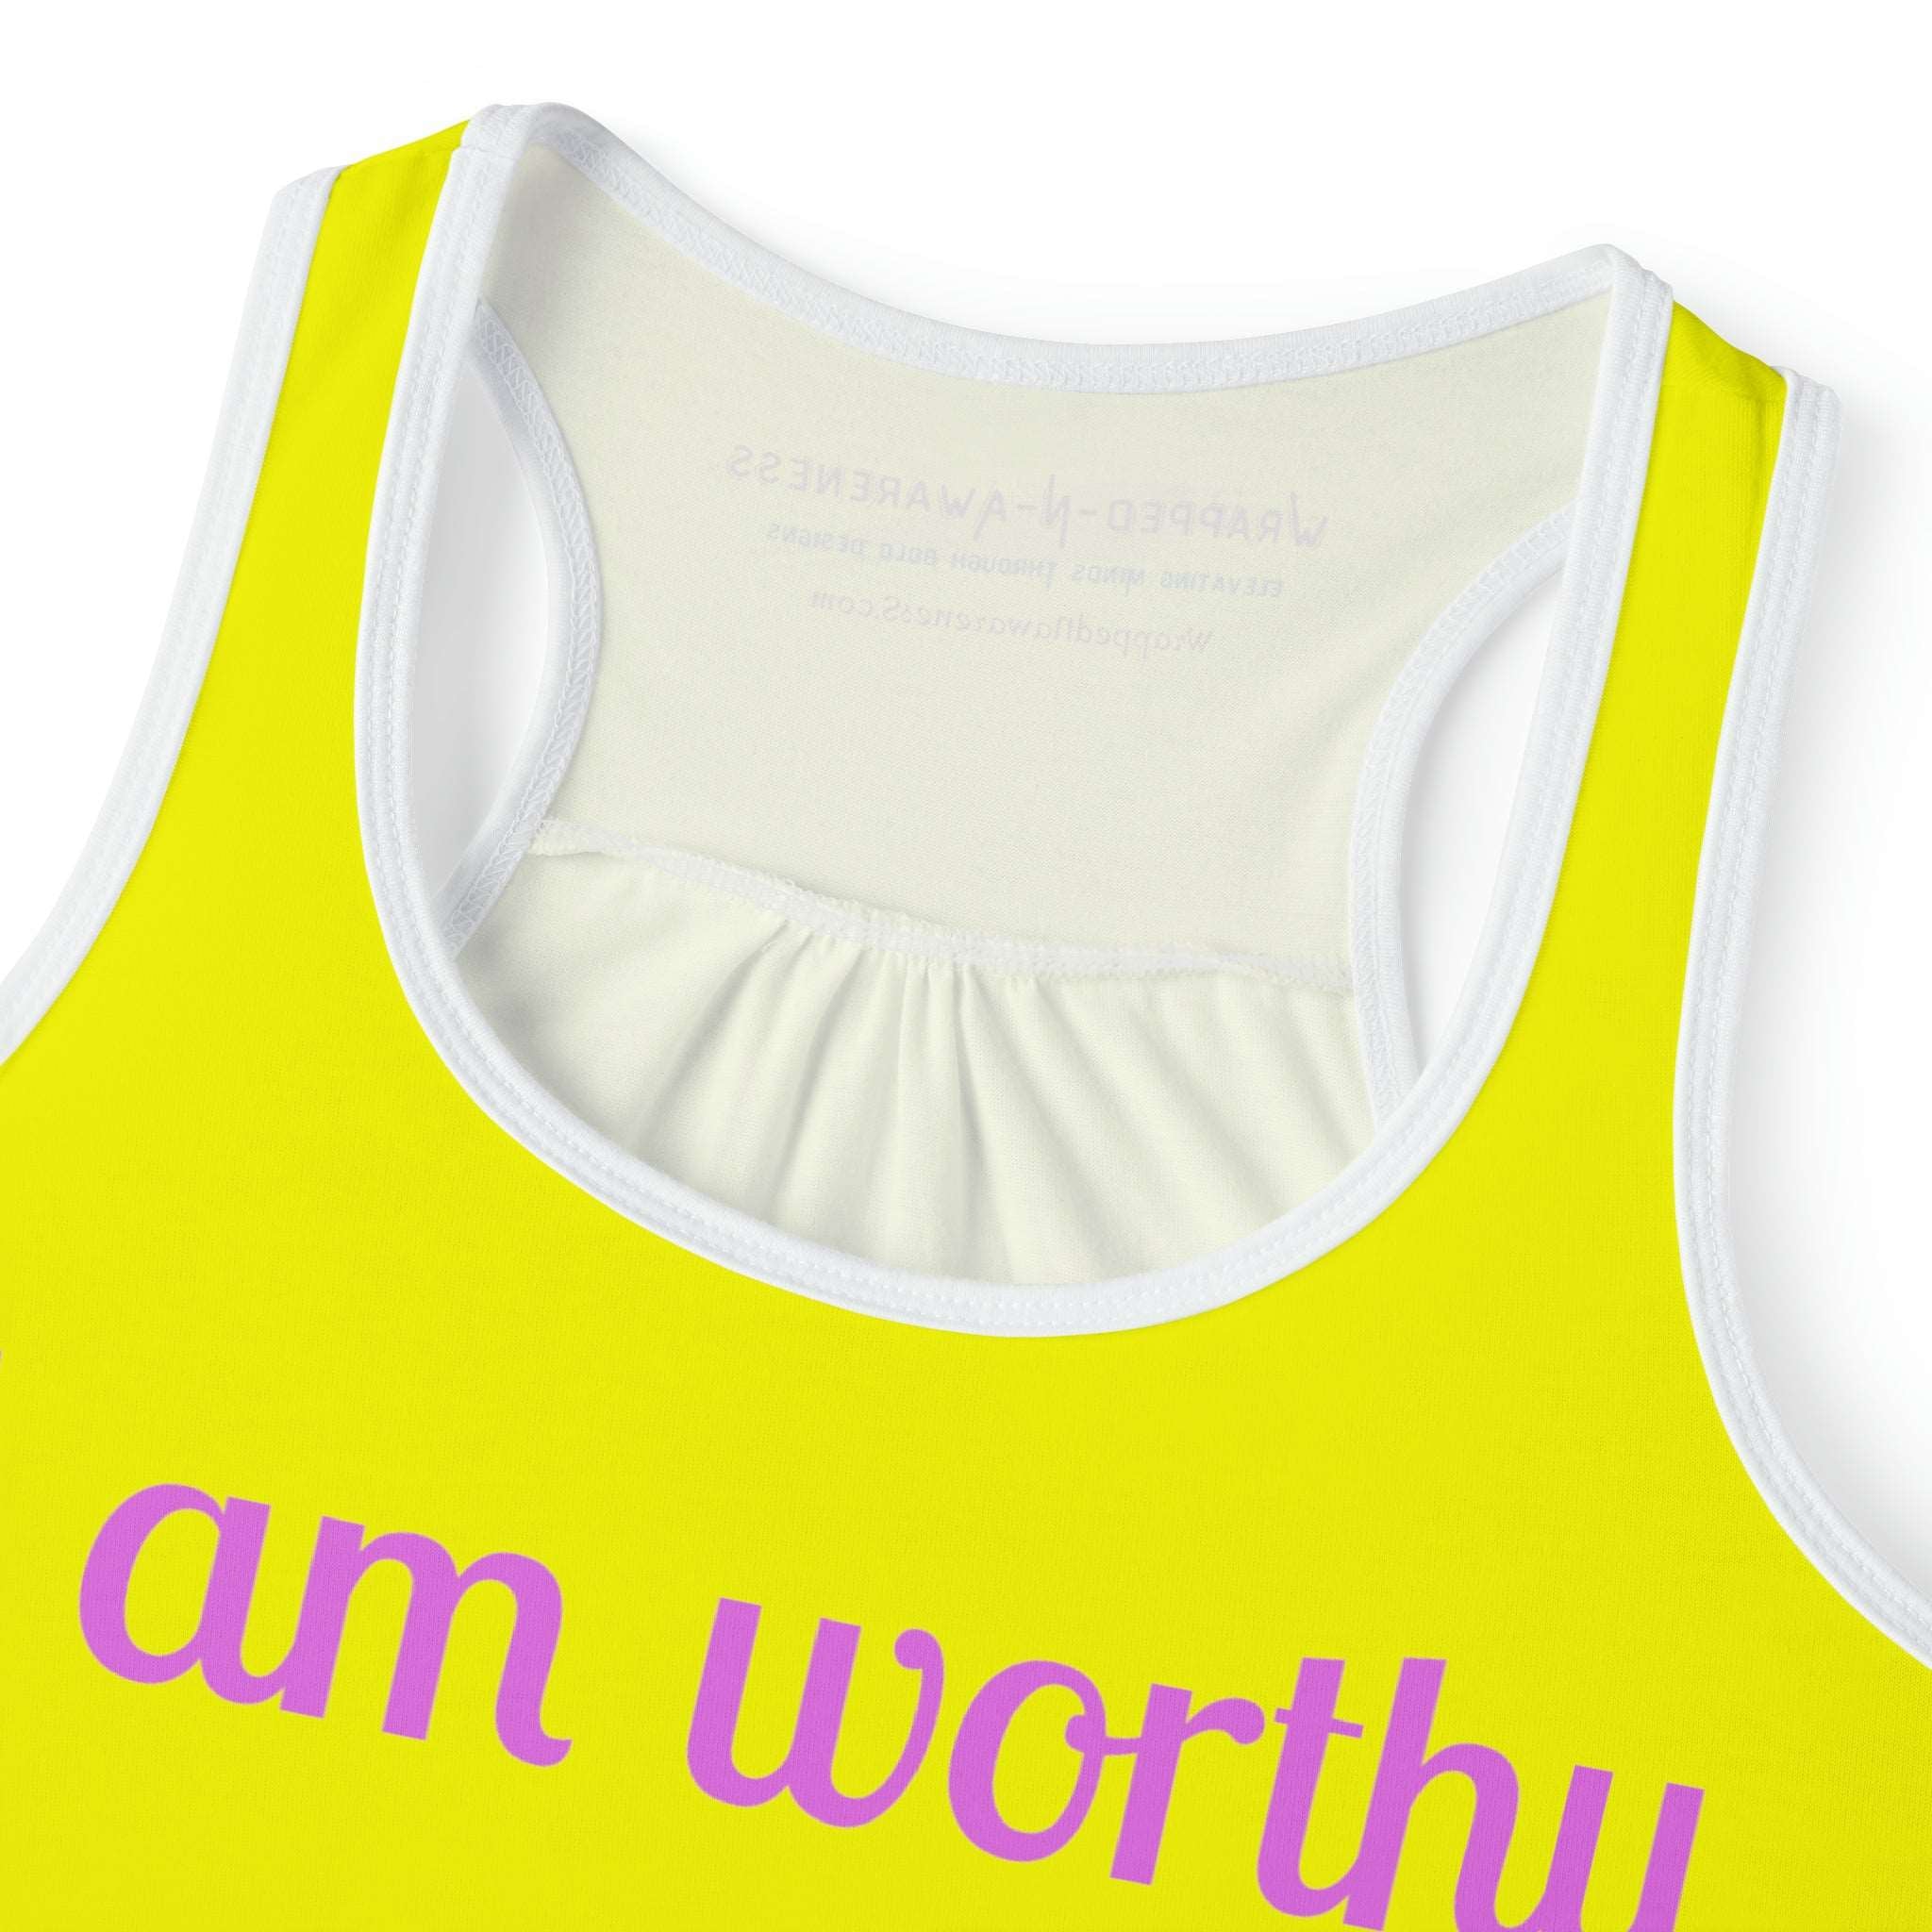 I Am Worthy Racerback: Personalized Comfort & Style White Activewear Athletic Tank Fitness Wear Racerback Racerback Tee Tank Top Women's Tank Workout Gear Yoga Tank Tank Top 6920634767399199023_2048_85a899c3-682f-4dd5-9bc7-bd0d7b8079ee Printify